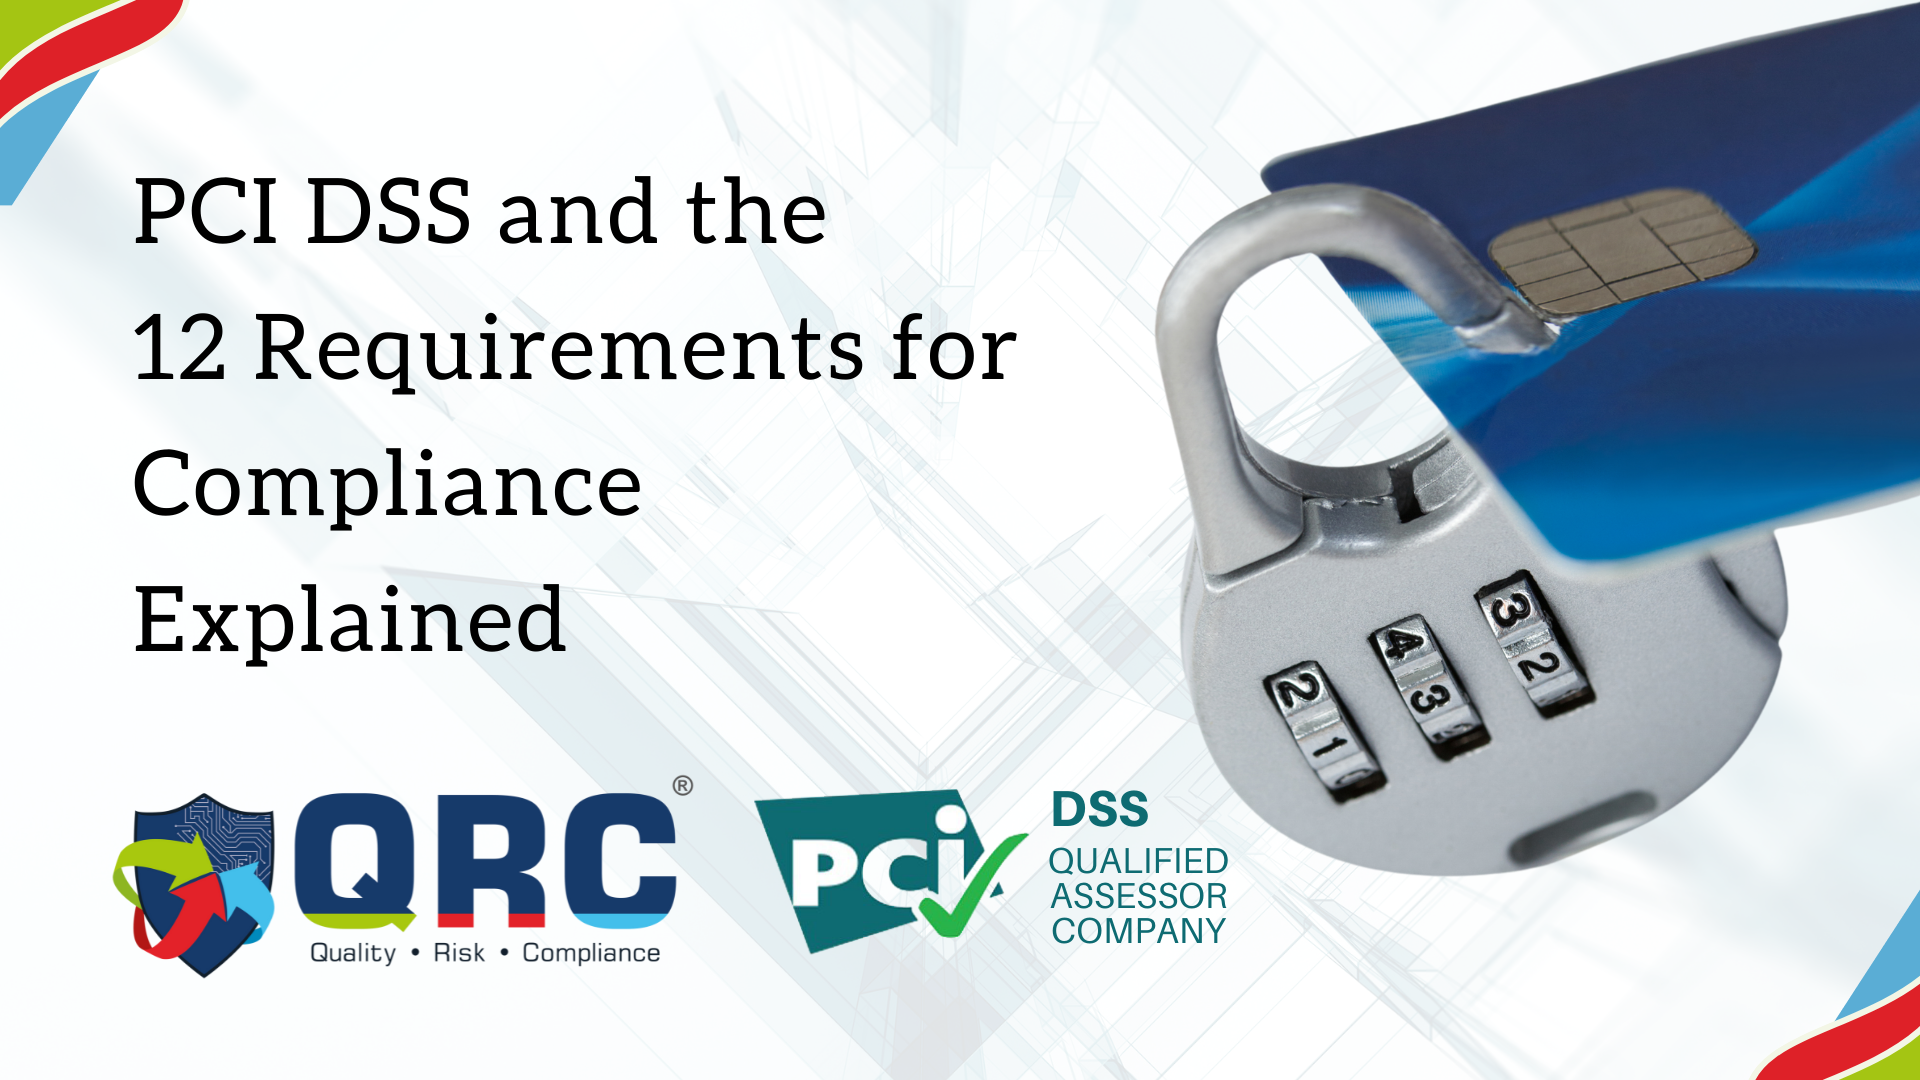 The 12 requirements of the pci dss Compliances